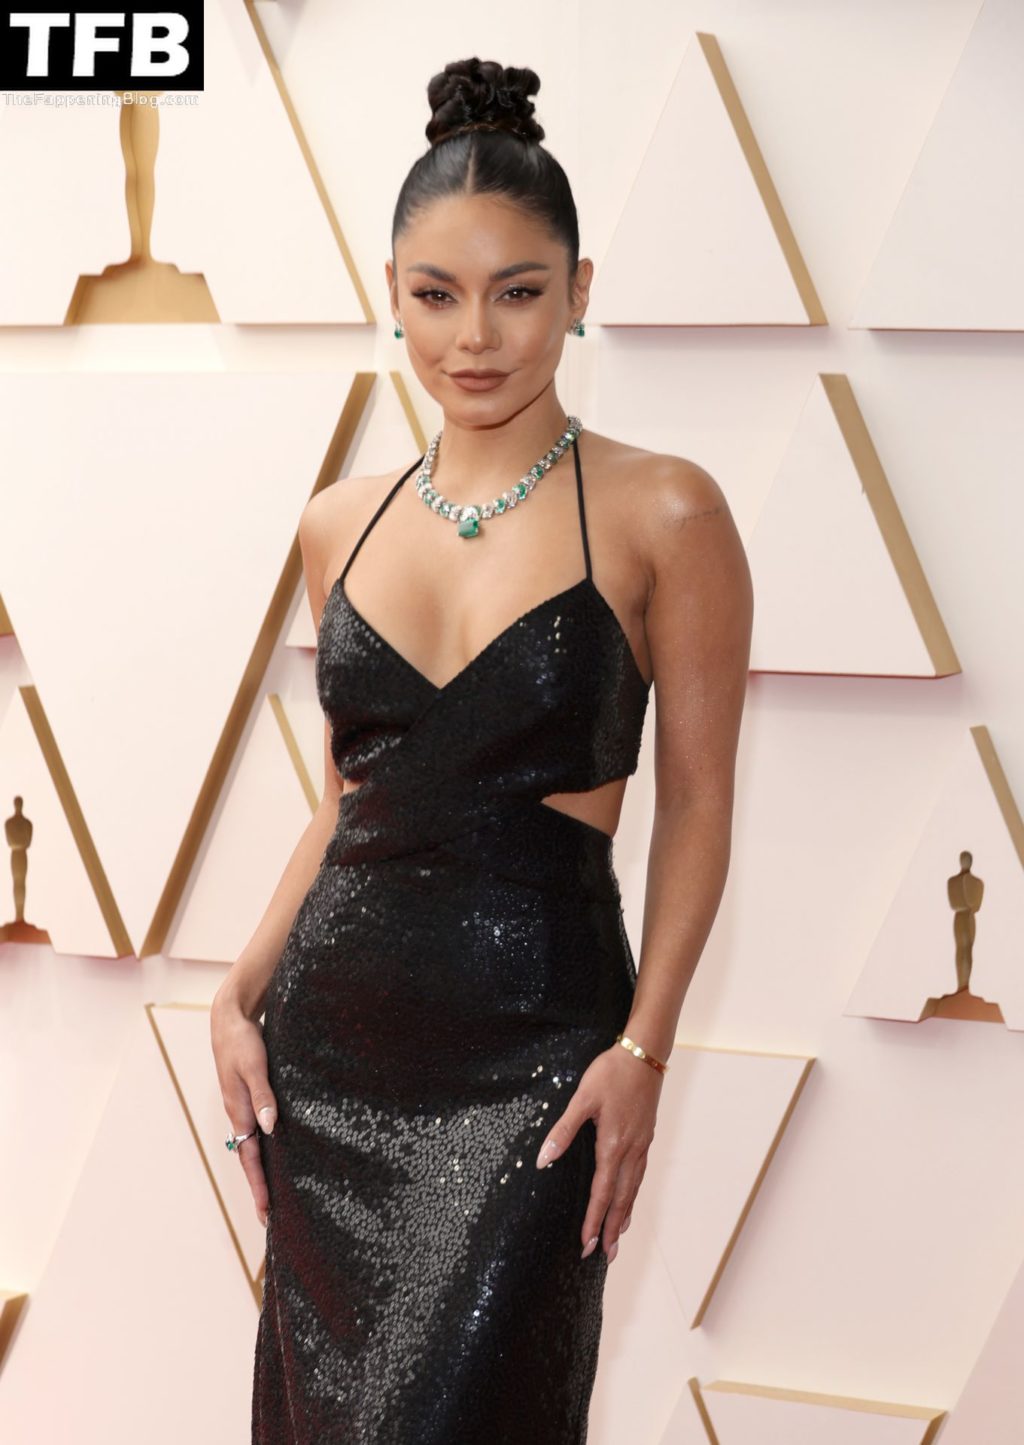 Vanessa Hudgens Sexy The Fappening Blog 24 4 1024x1445 - Vanessa Hudgens Poses on the Red Carpet at the 94th Annual Academy Awards (83 Photos)